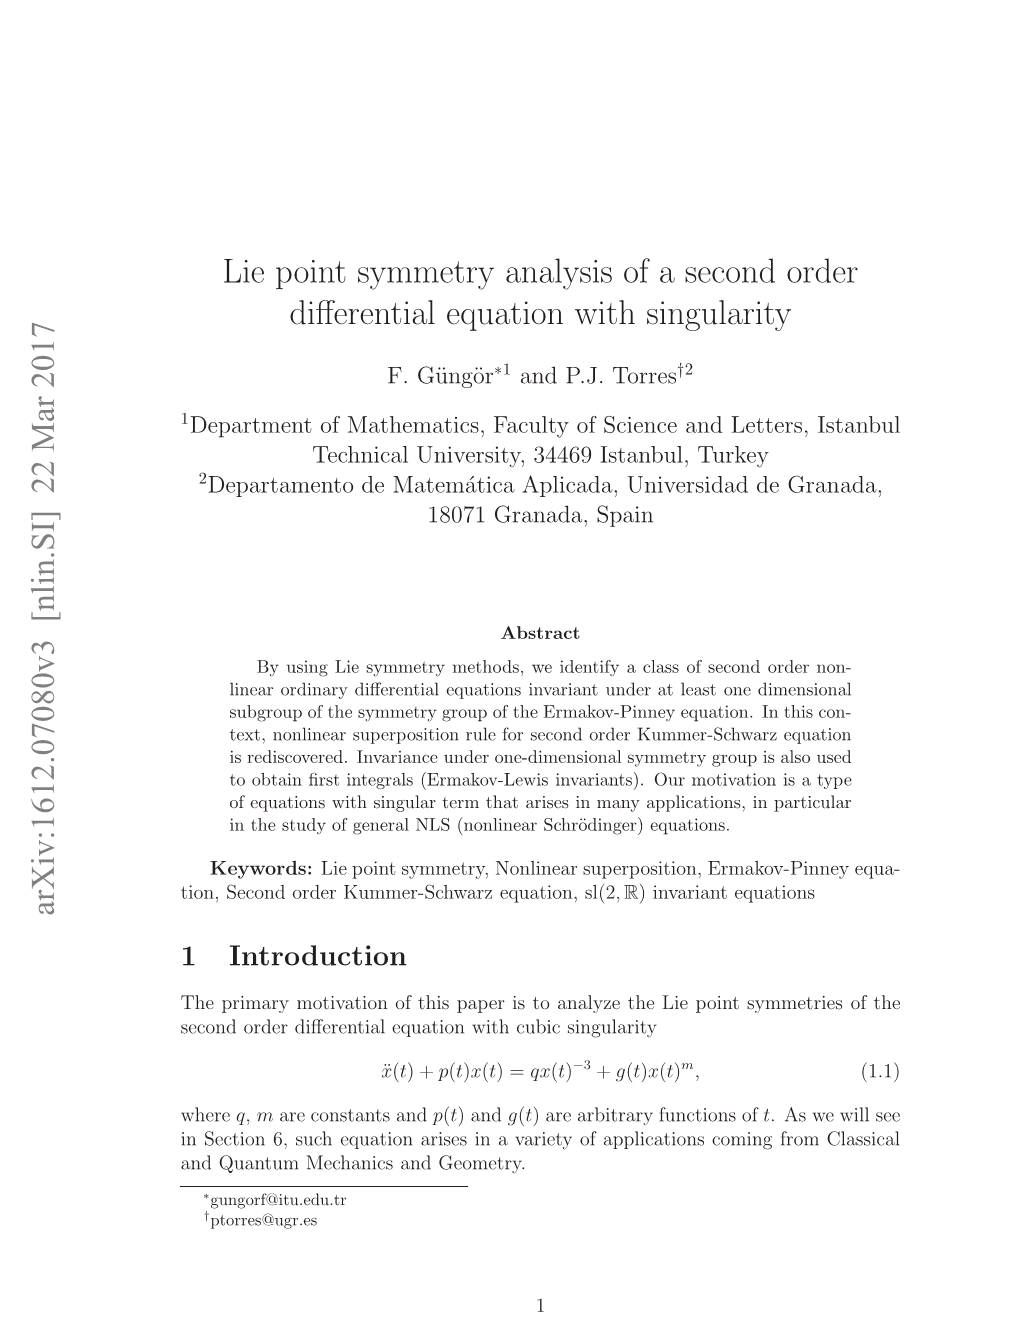 Lie Point Symmetry Analysis of a Second Order Differential Equation